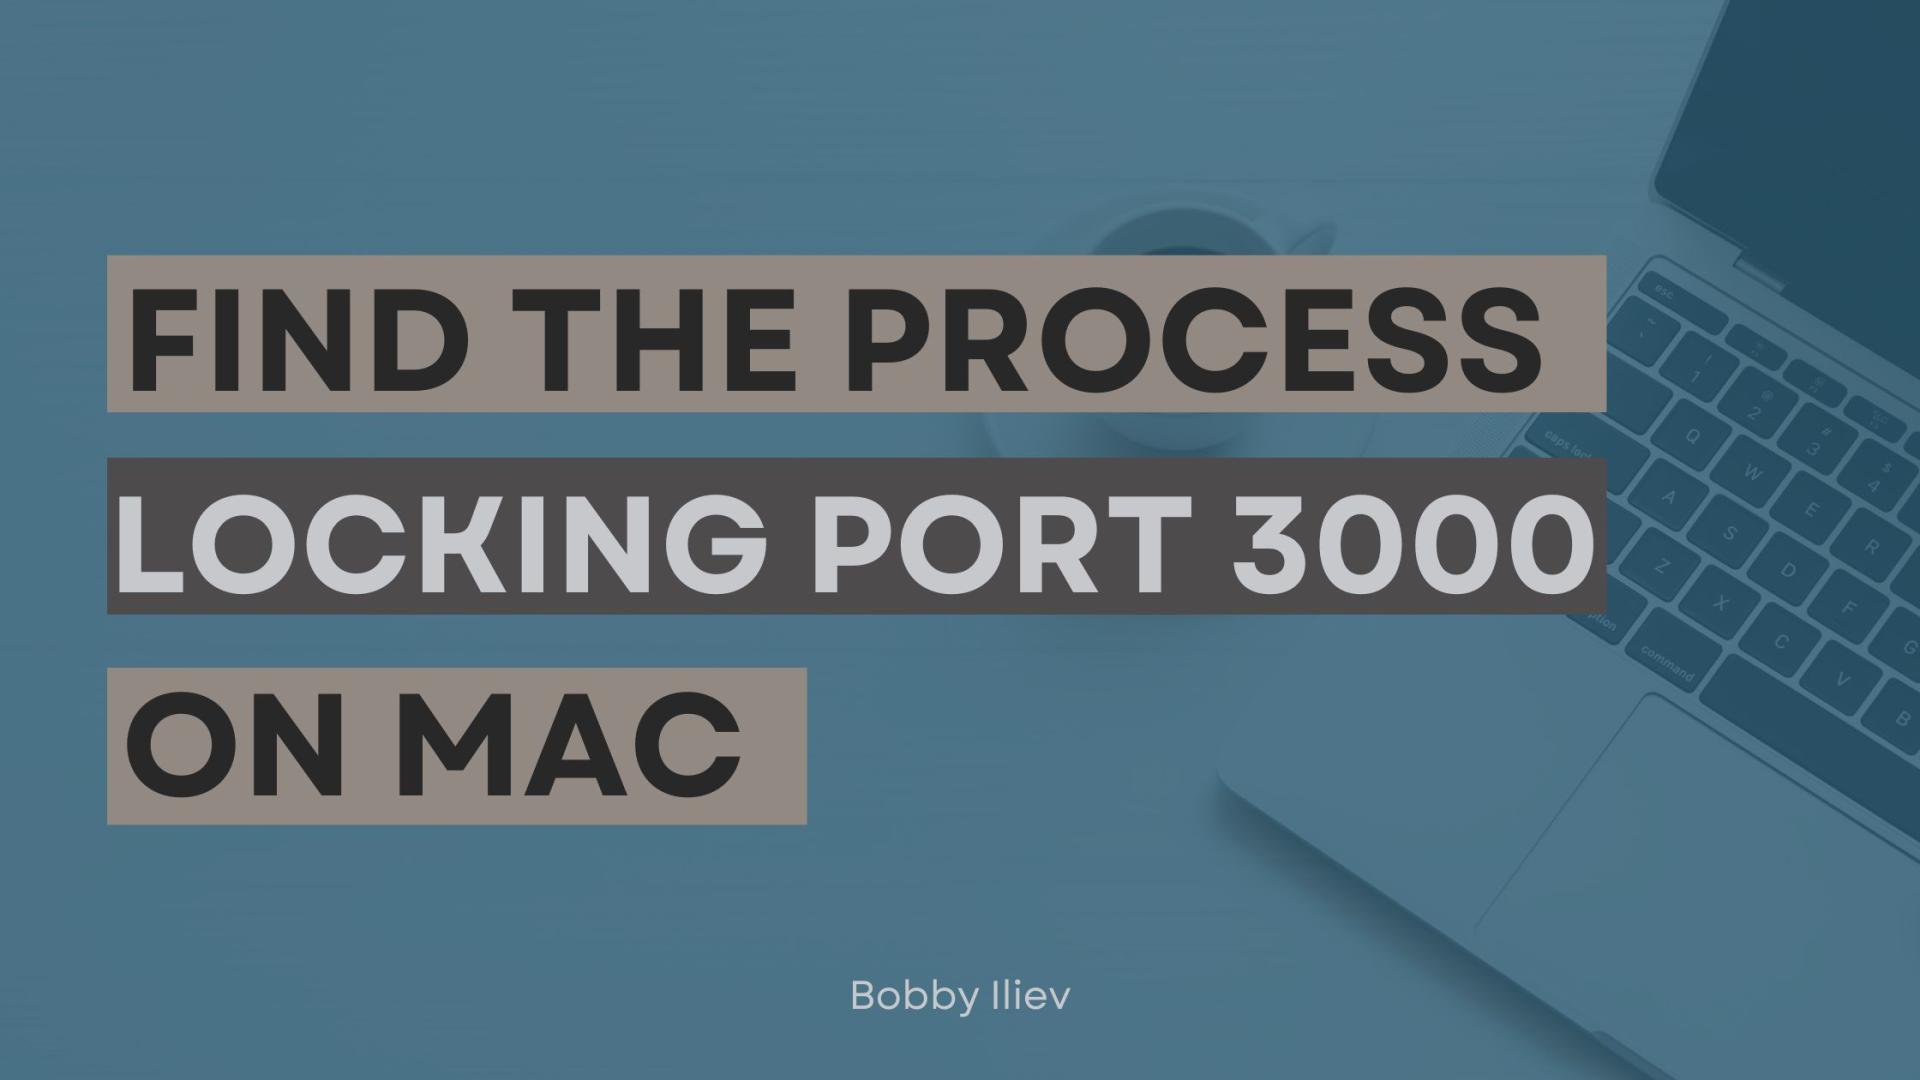 How to find a process locking port 3000 on Mac?